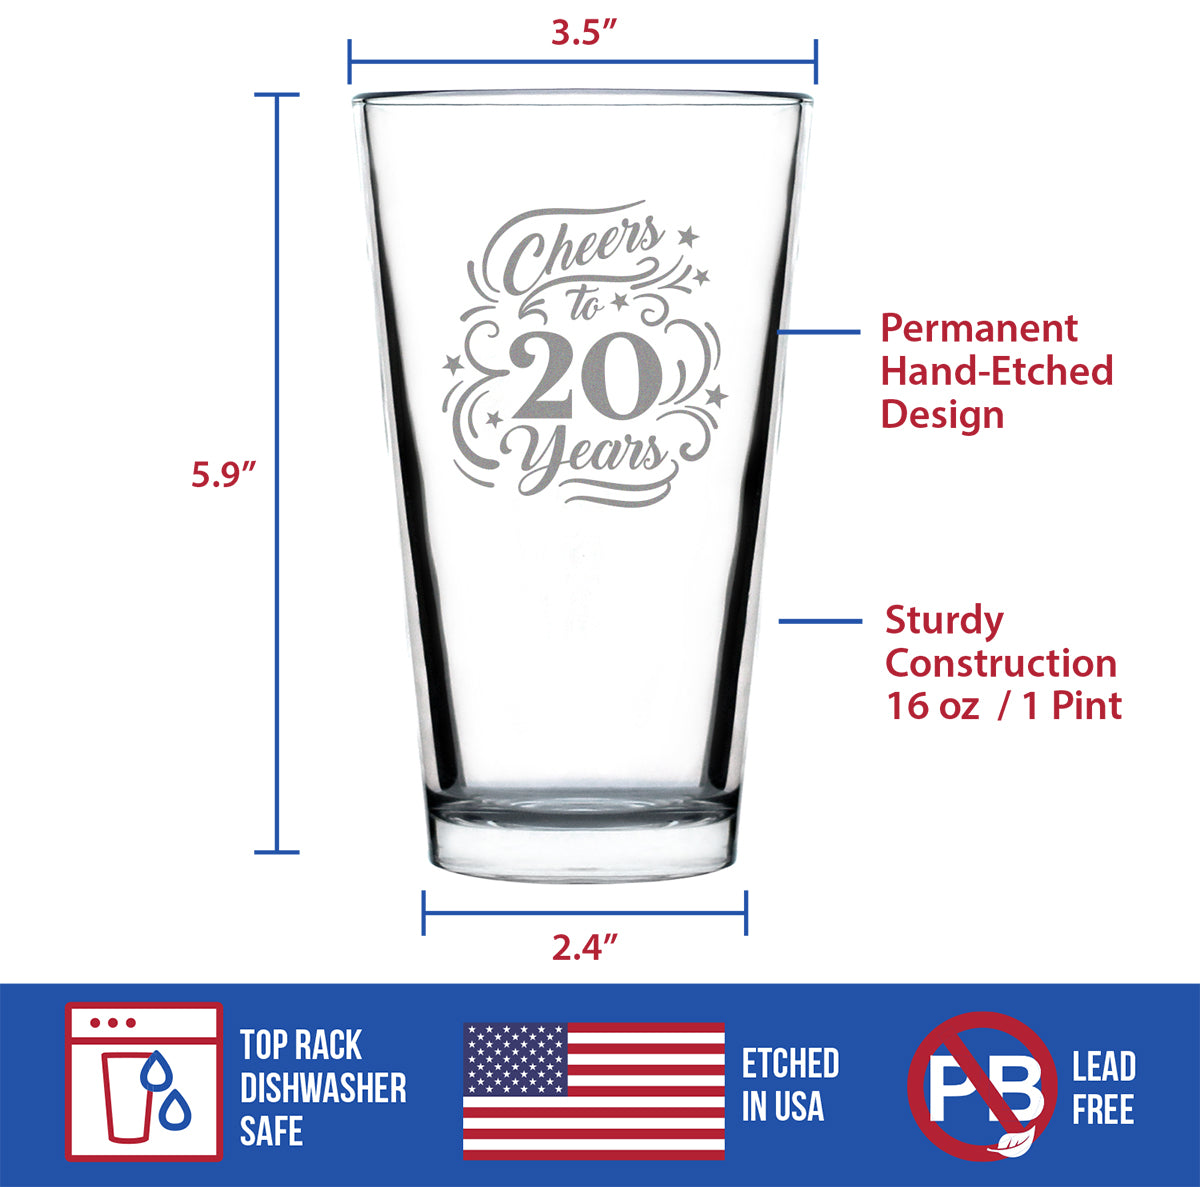 Cheers to 20 Years - Pint Glass for Beer - Gifts for Women &amp; Men - 20th Anniversary Party Decor - 16 Oz Glasses